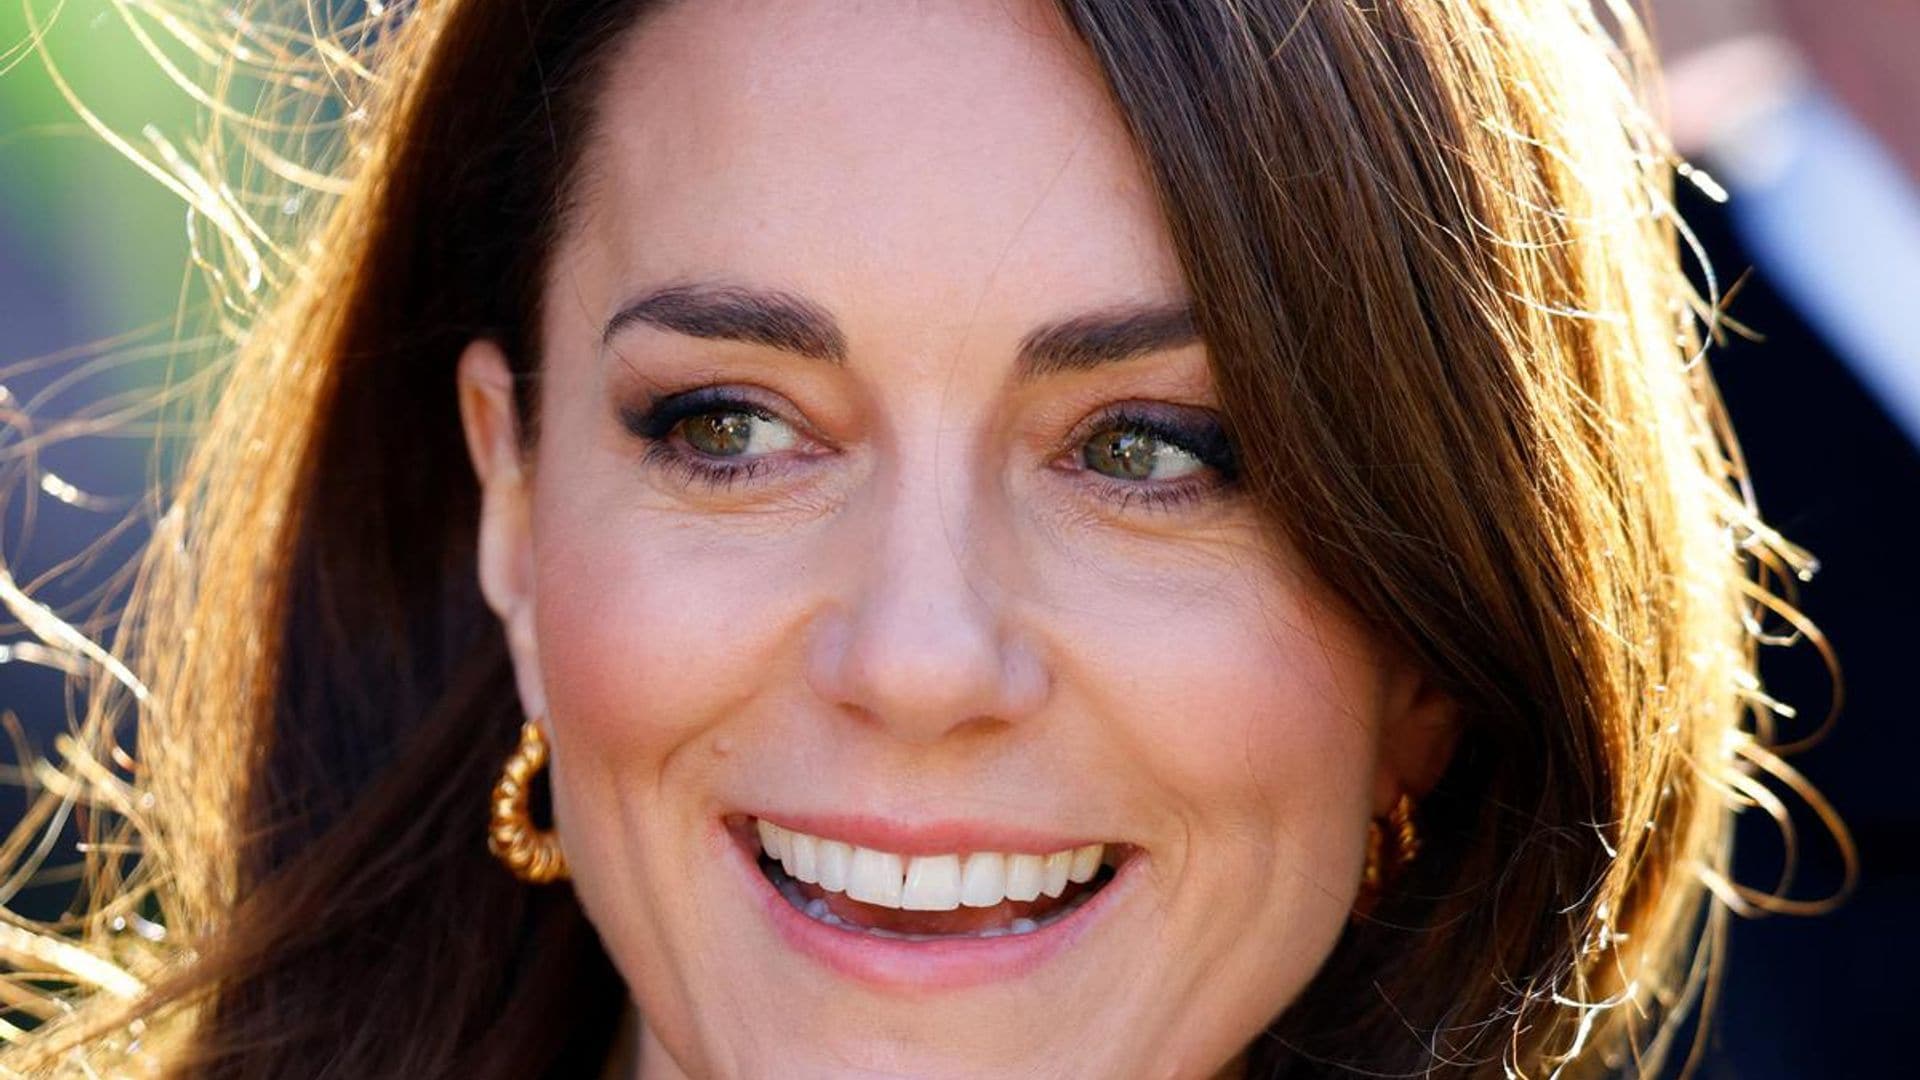 How to achieve Kate Middleton’s latest eyebrow laminated look